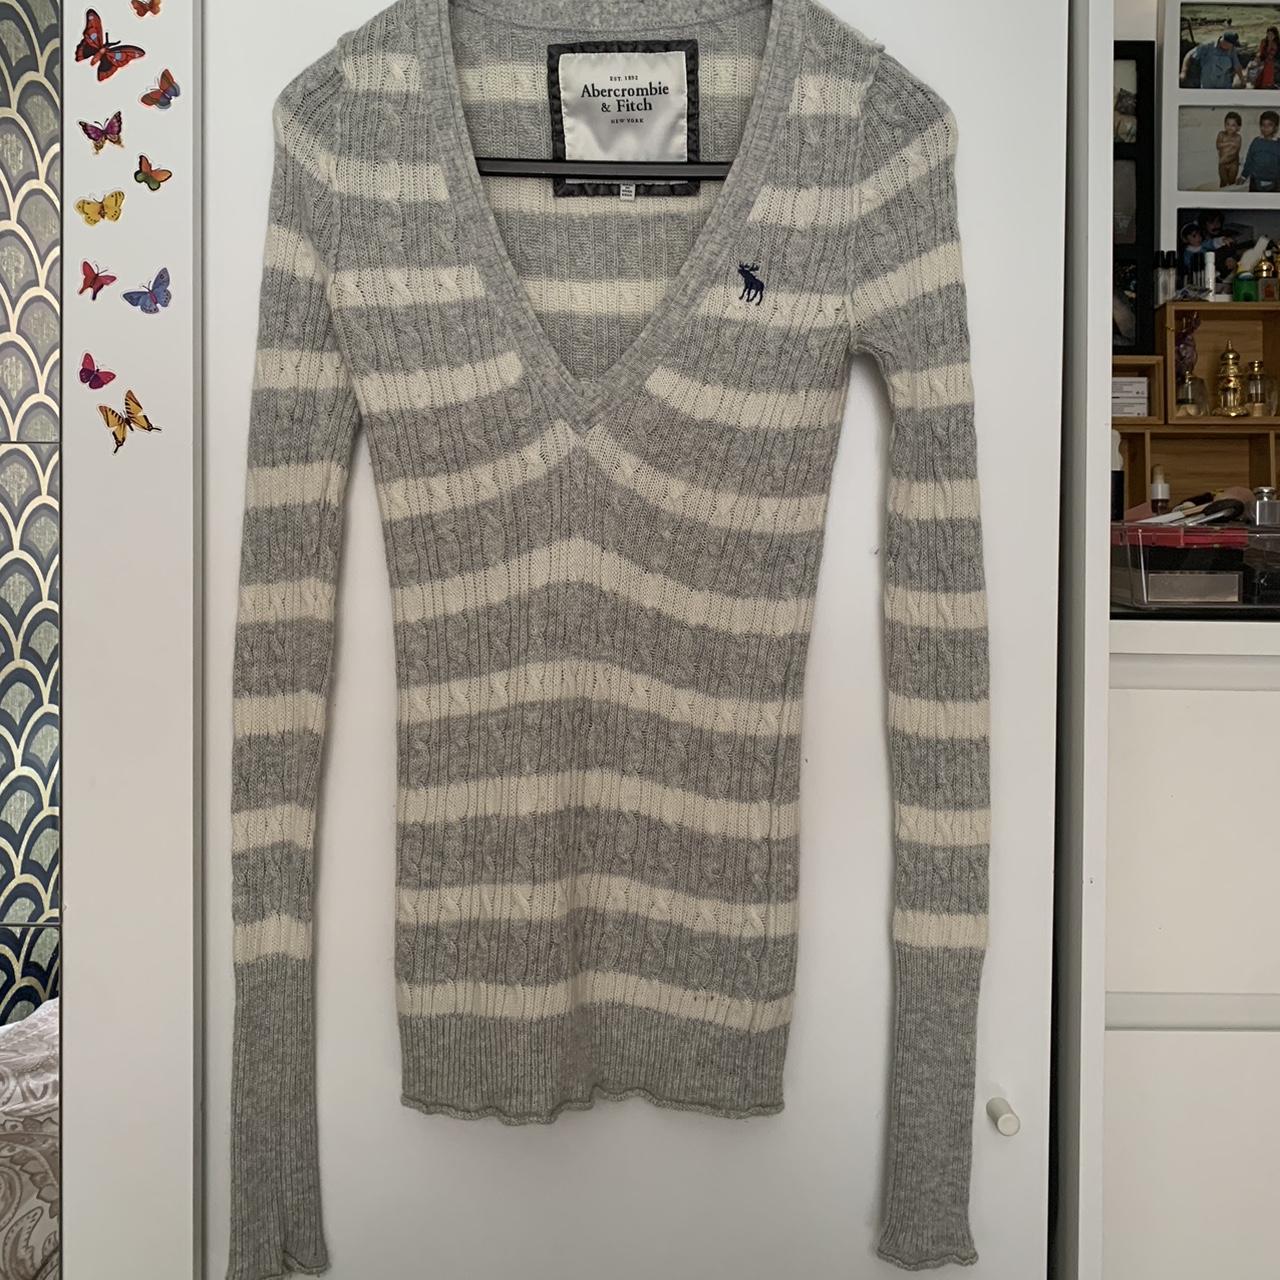 Abercrombie & Fitch Women's Grey and White Jumper | Depop